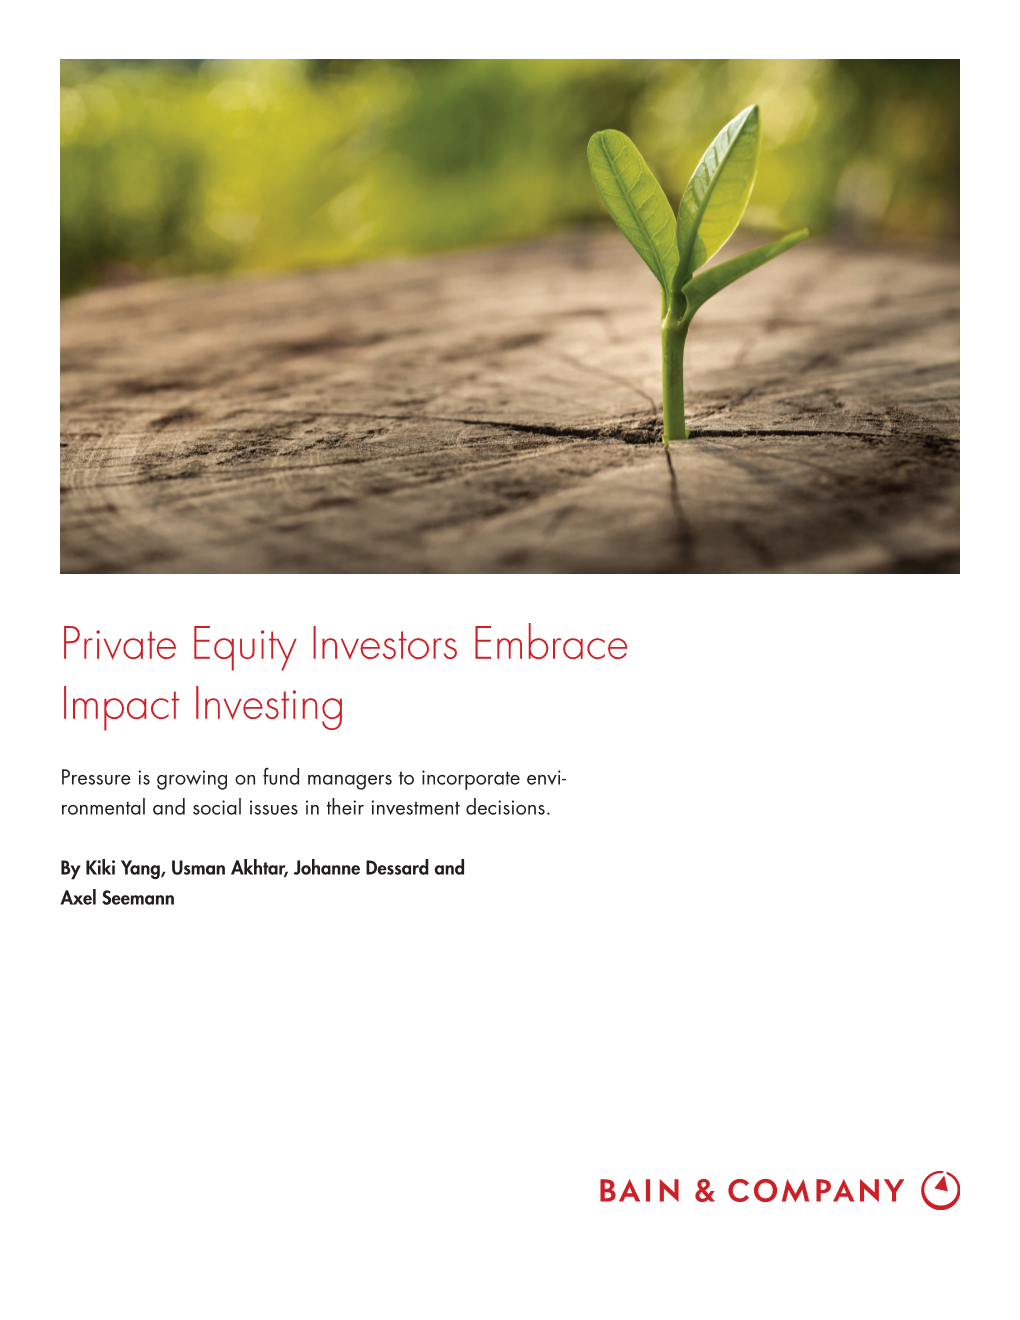 Private Equity Investors Embrace Impact Investing